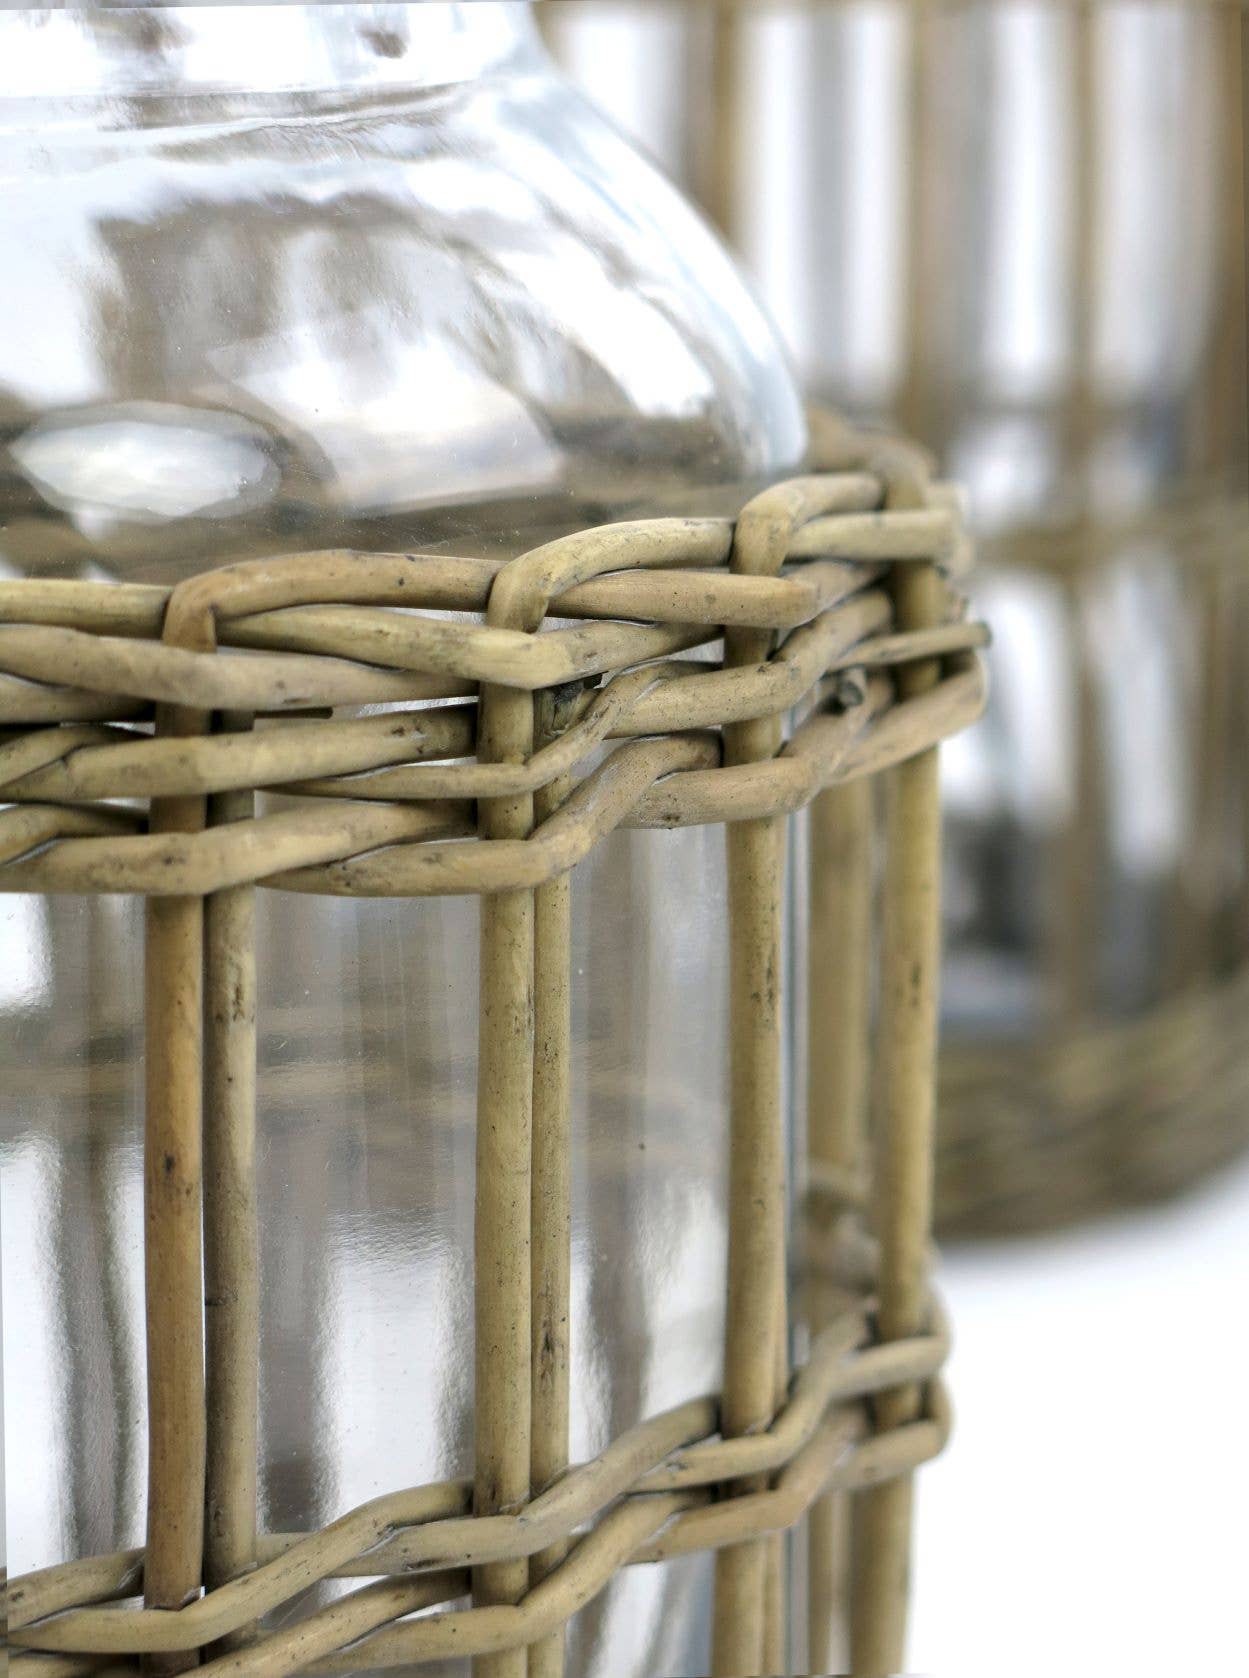 Glass and Woven Willow Canister - Small